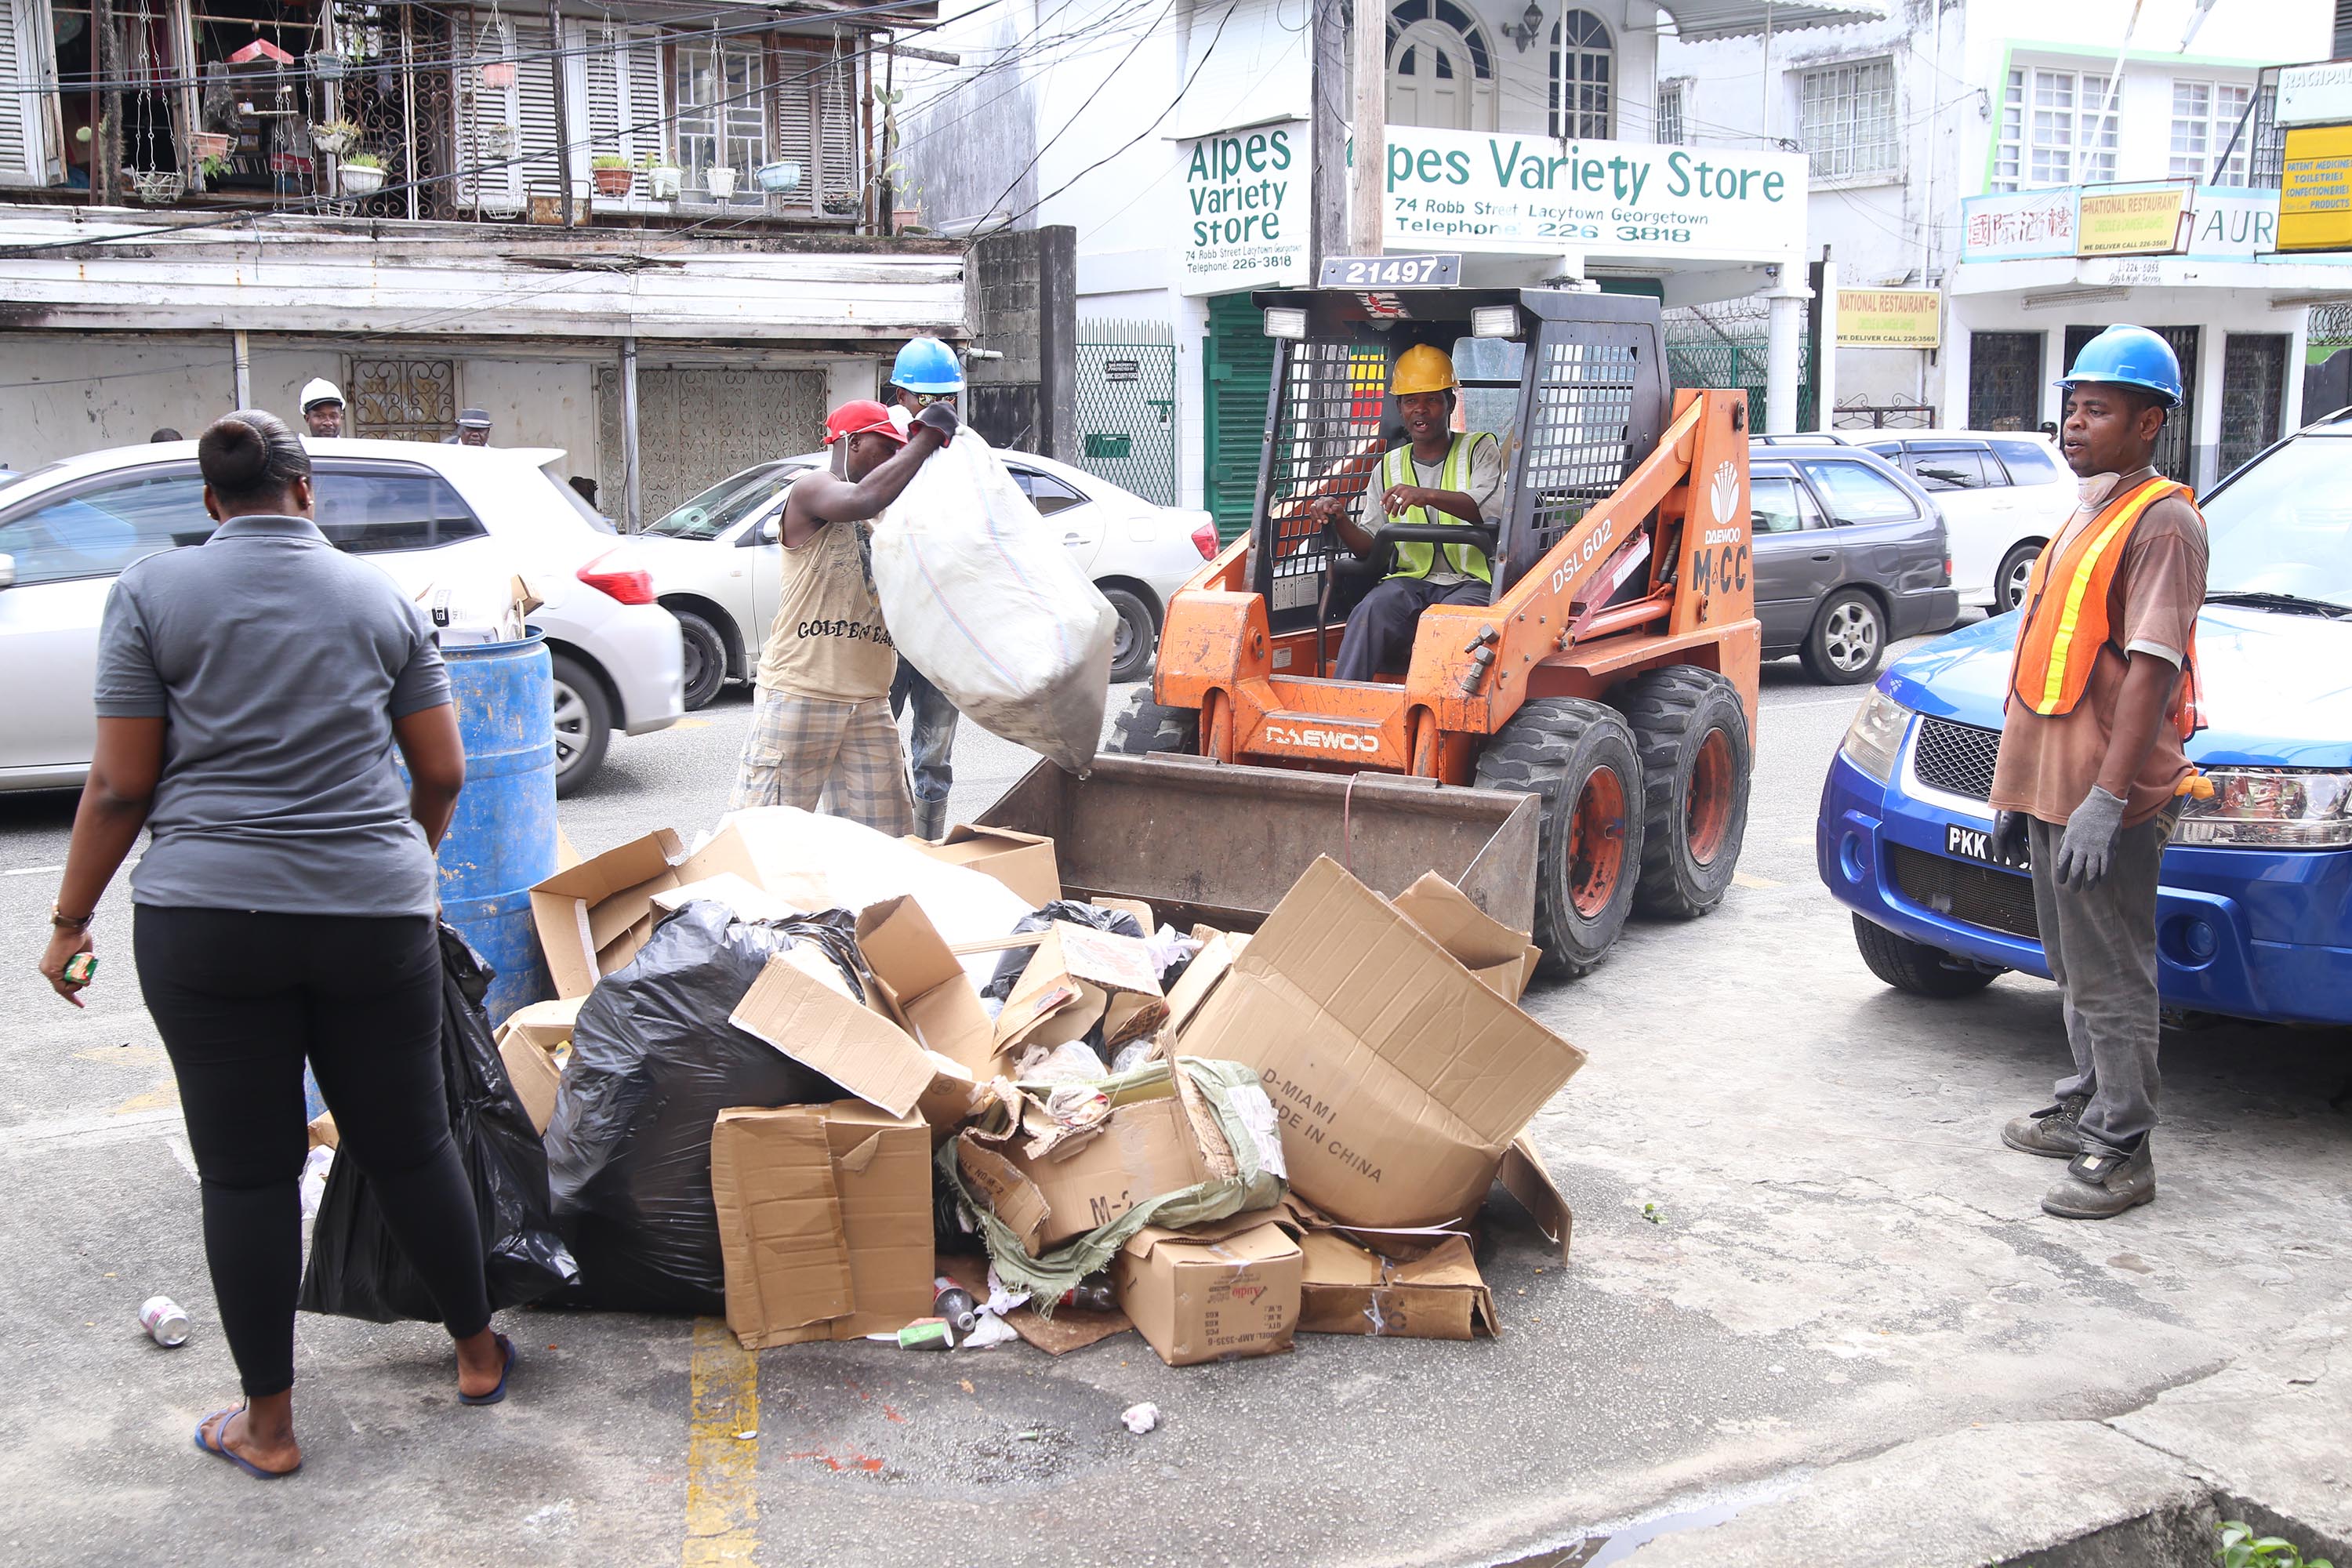 Workers from City Hall’s Solid Waste Department removing garbage